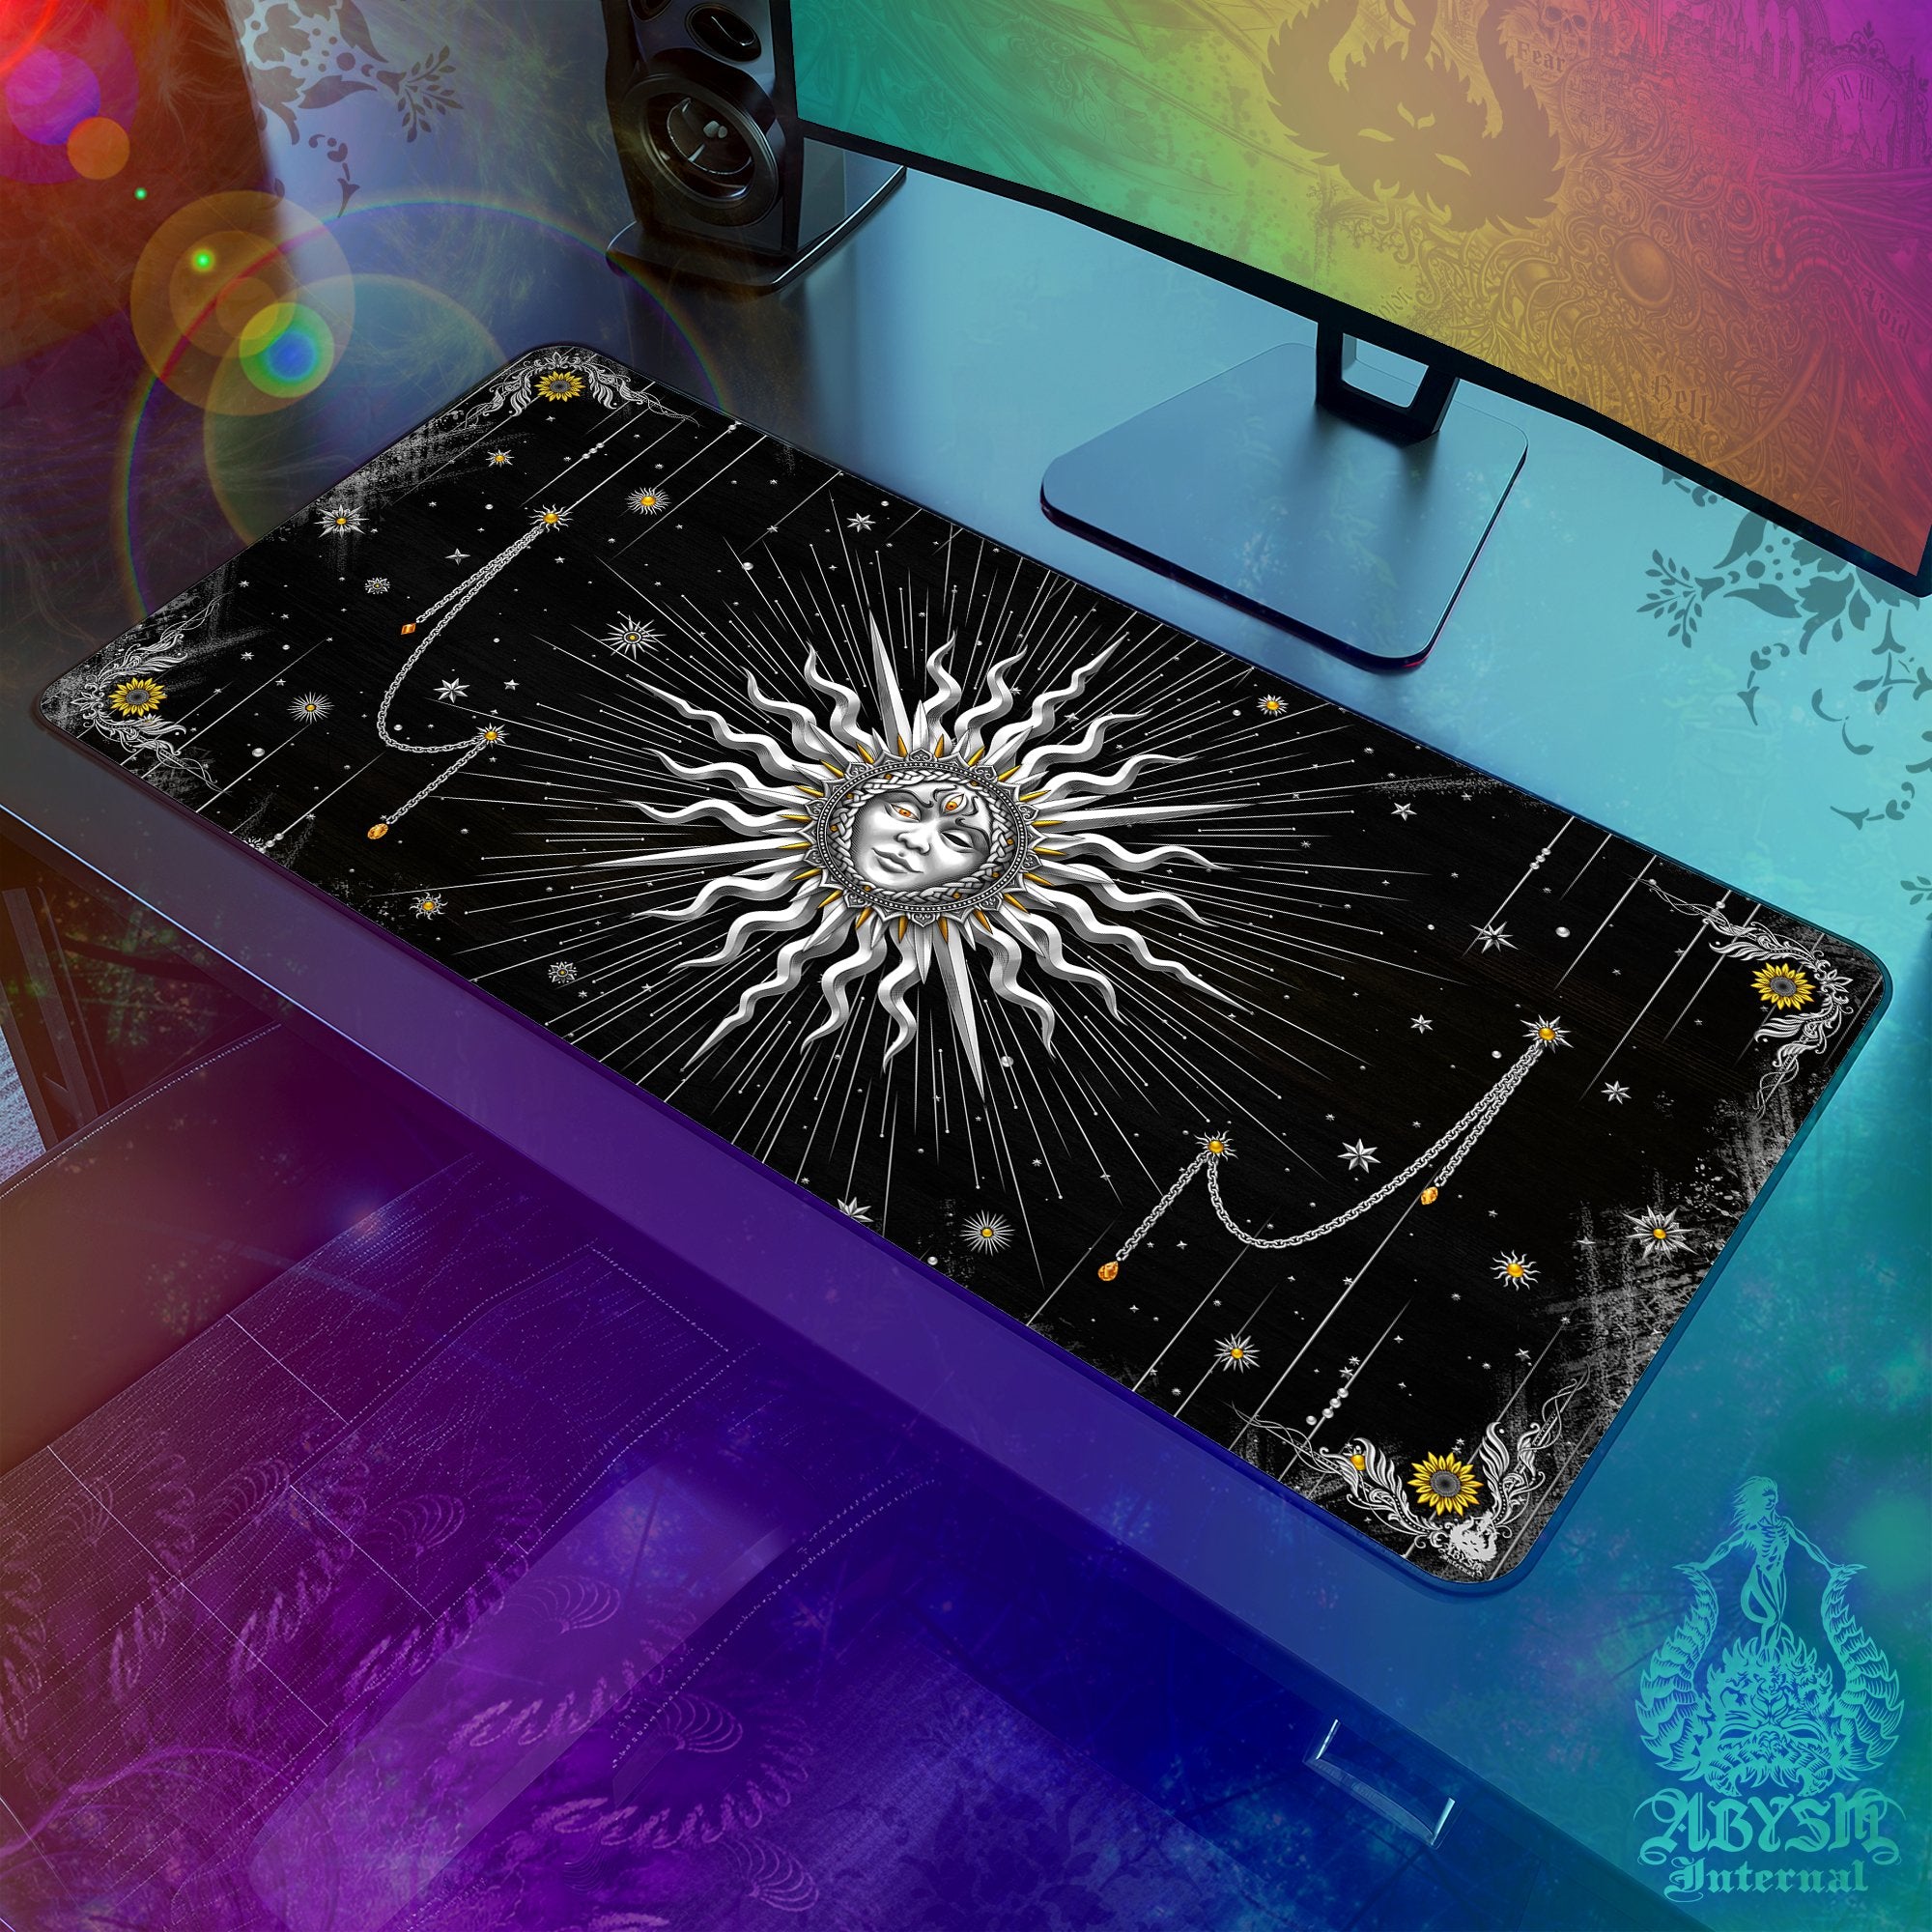 Silver Sun Desk Mat, Tarot Arcana Gaming Mouse Pad, Indie Table Protector Cover, Boho Workpad, Esoteric Art Print - 7 Colors - Abysm Internal